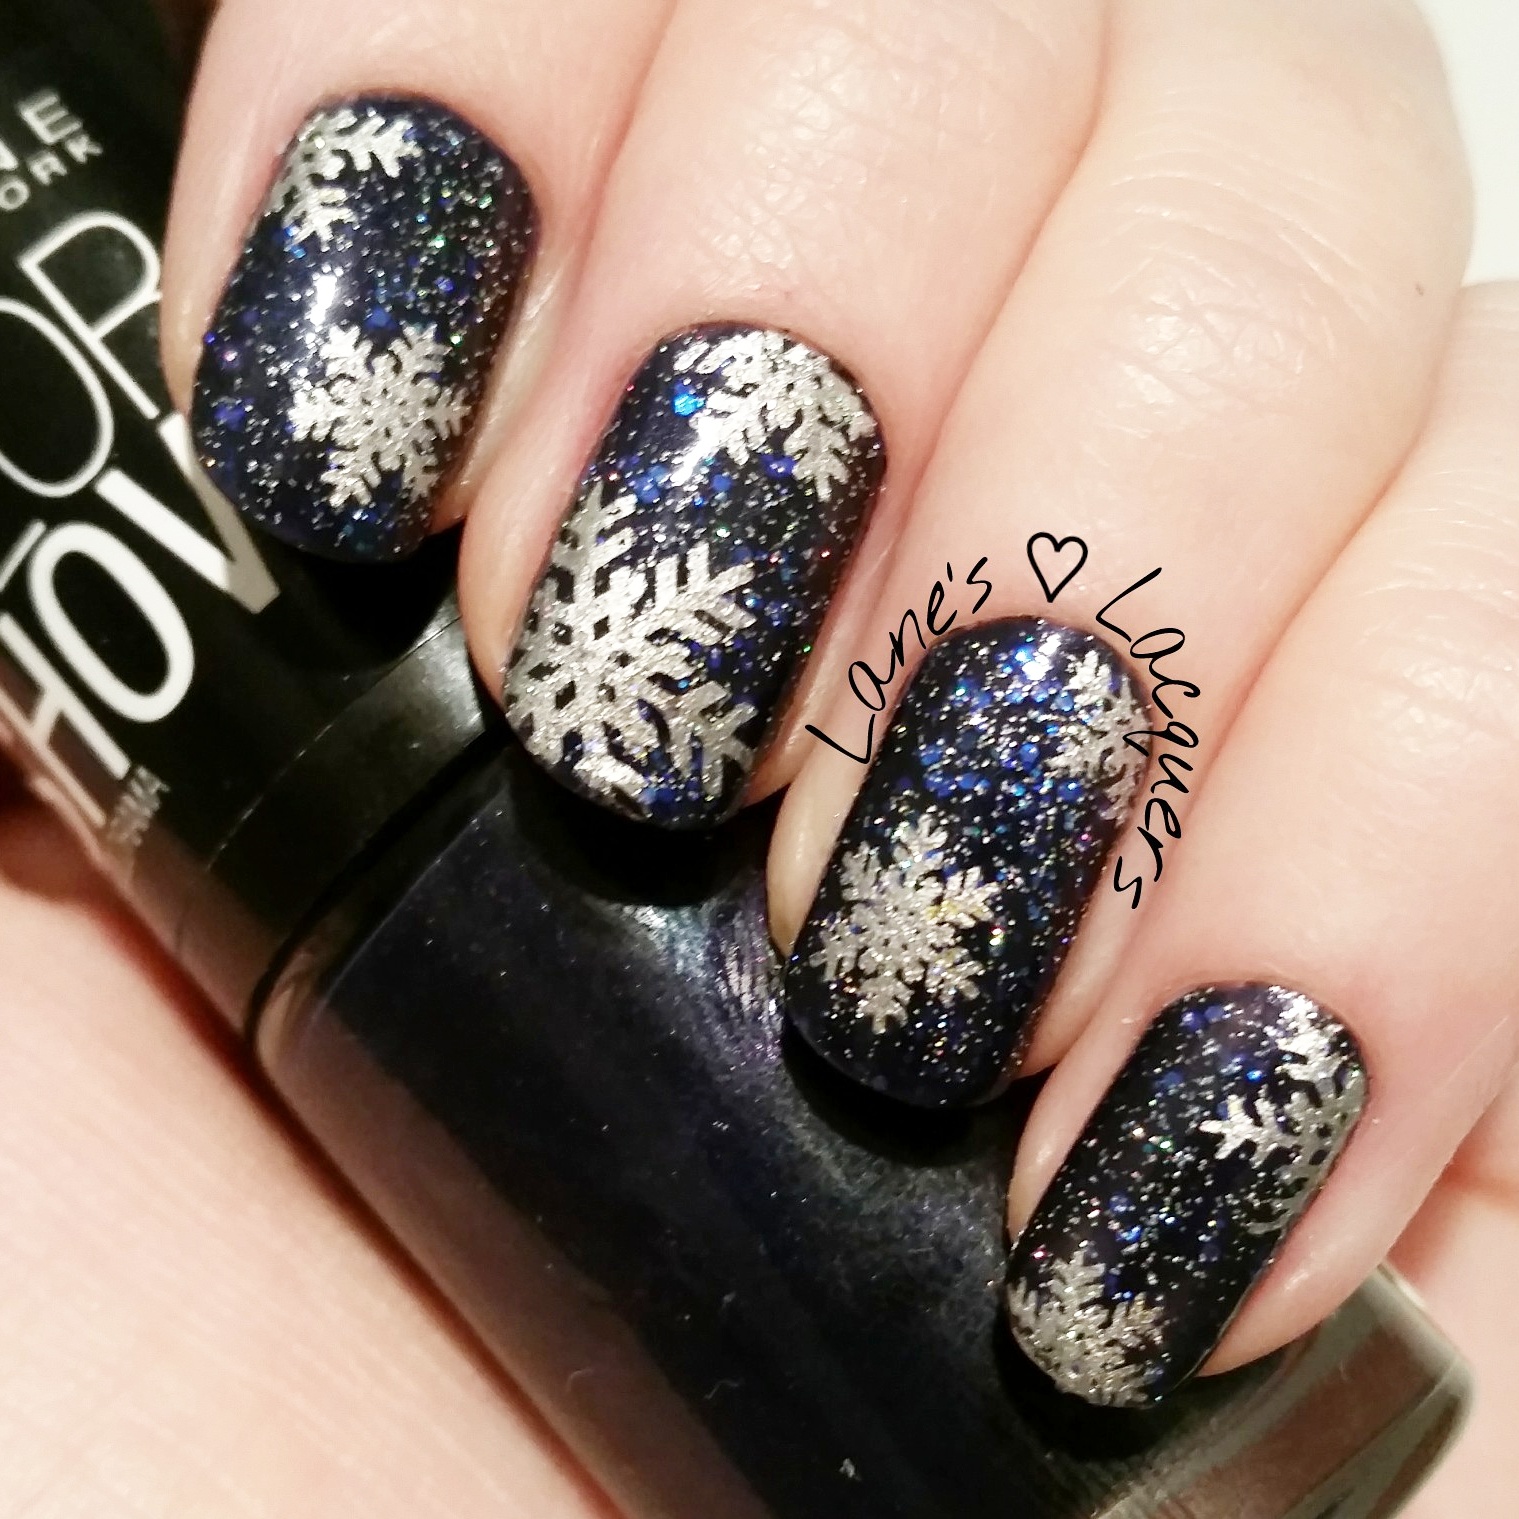 Lane's Lacquers: 40 Great Nail Art Ideas: Winter